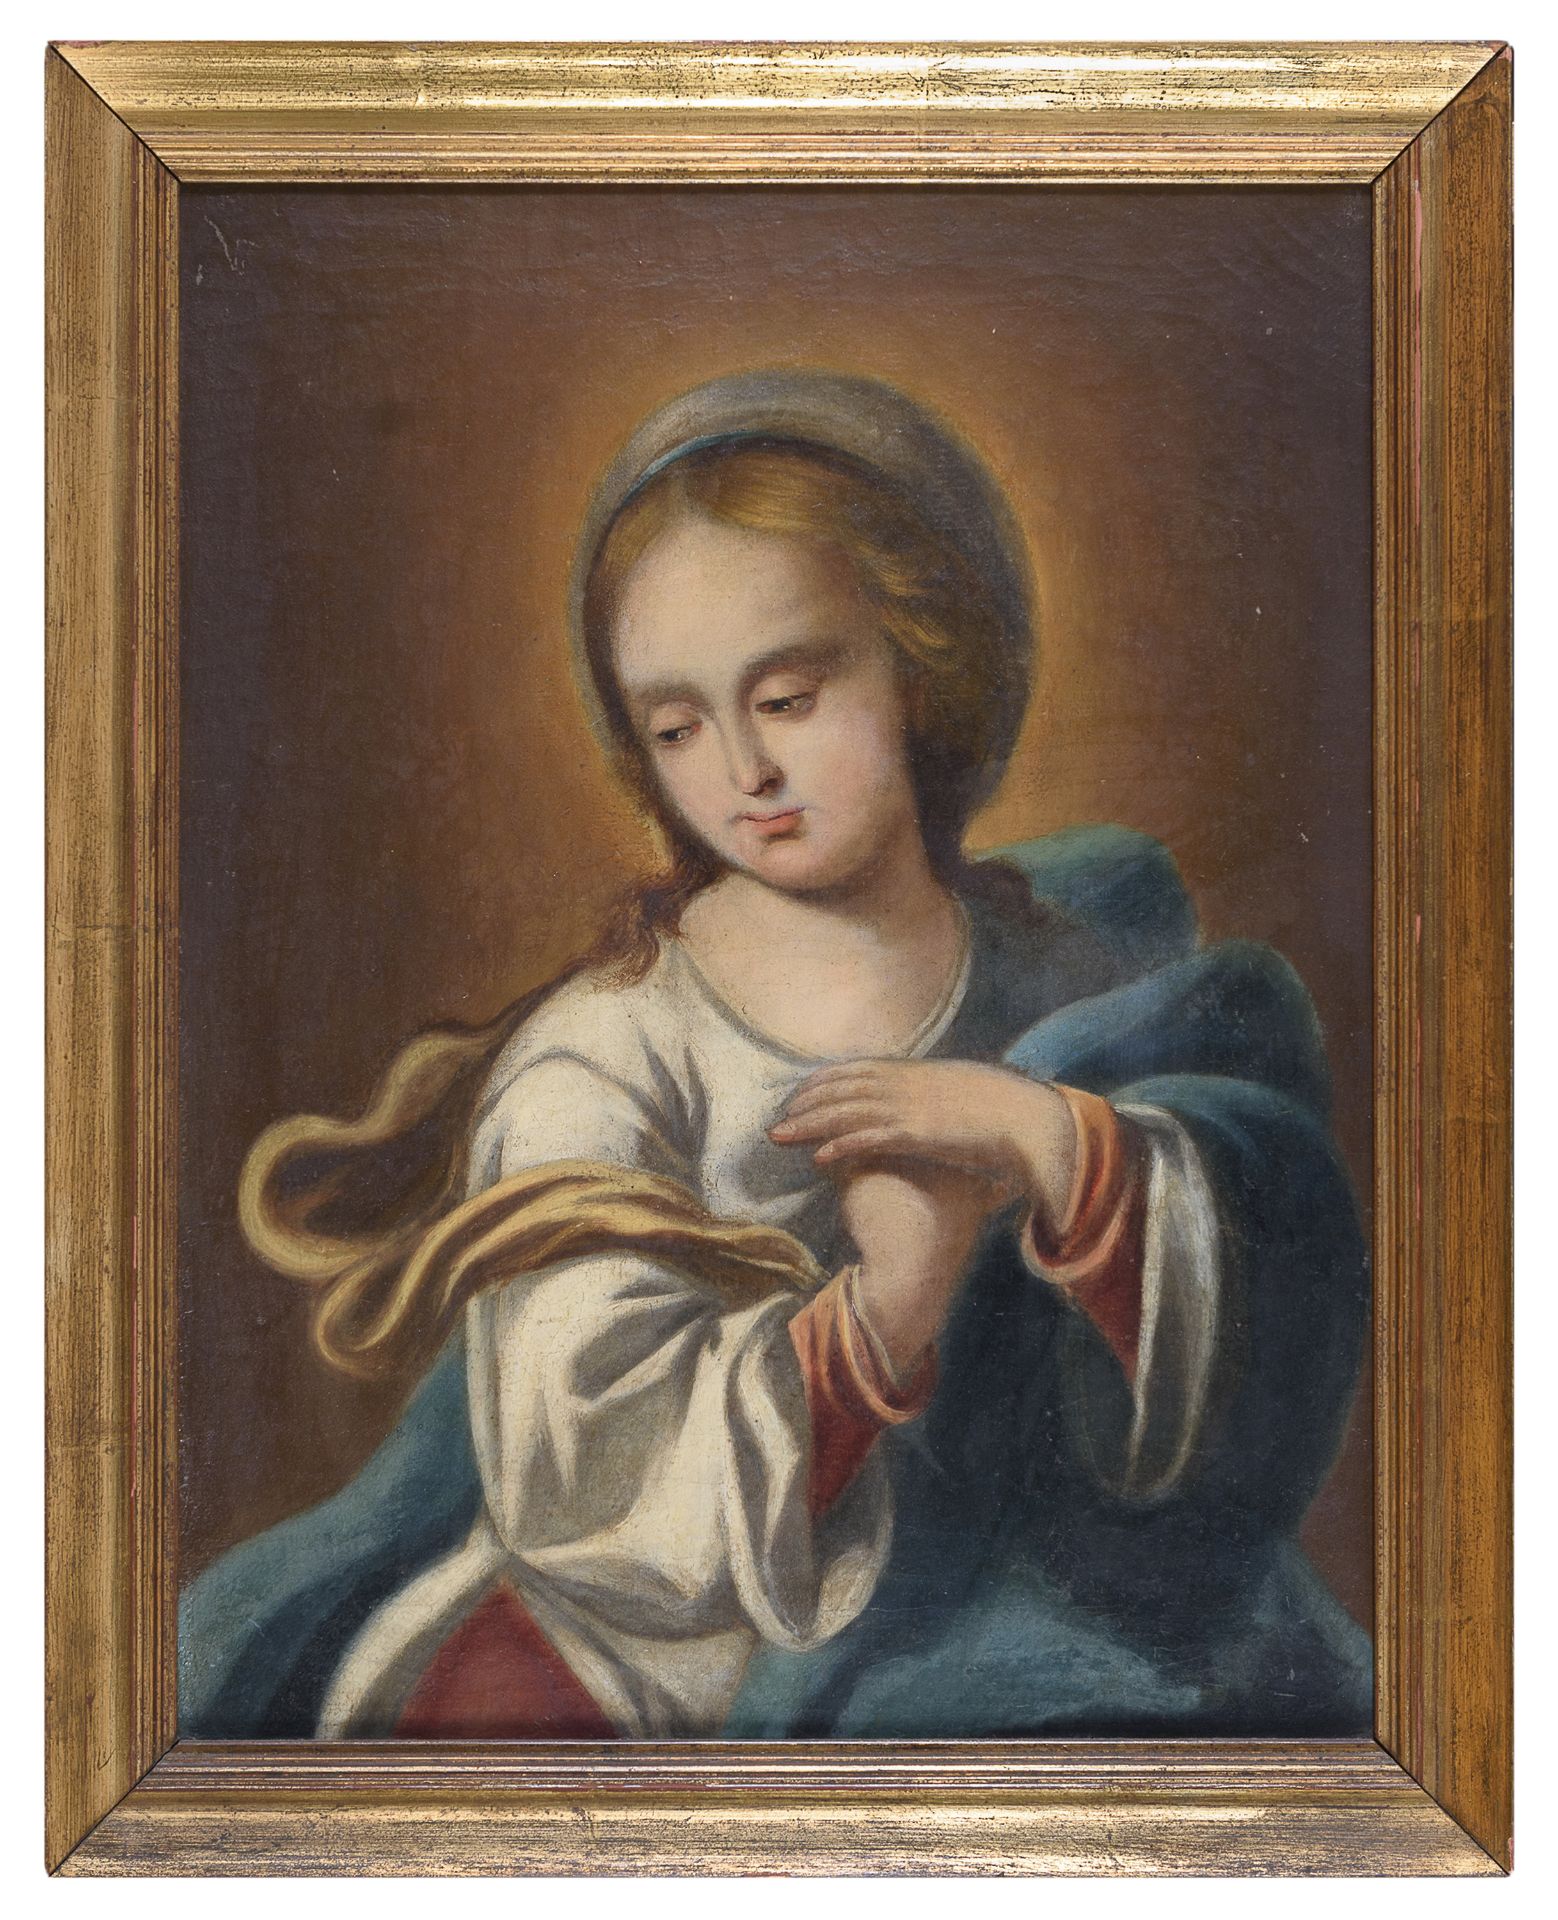 NEAPOLITAN OIL PAINTING OF THE VIRGIN IN ADORATION 18TH CENTURY